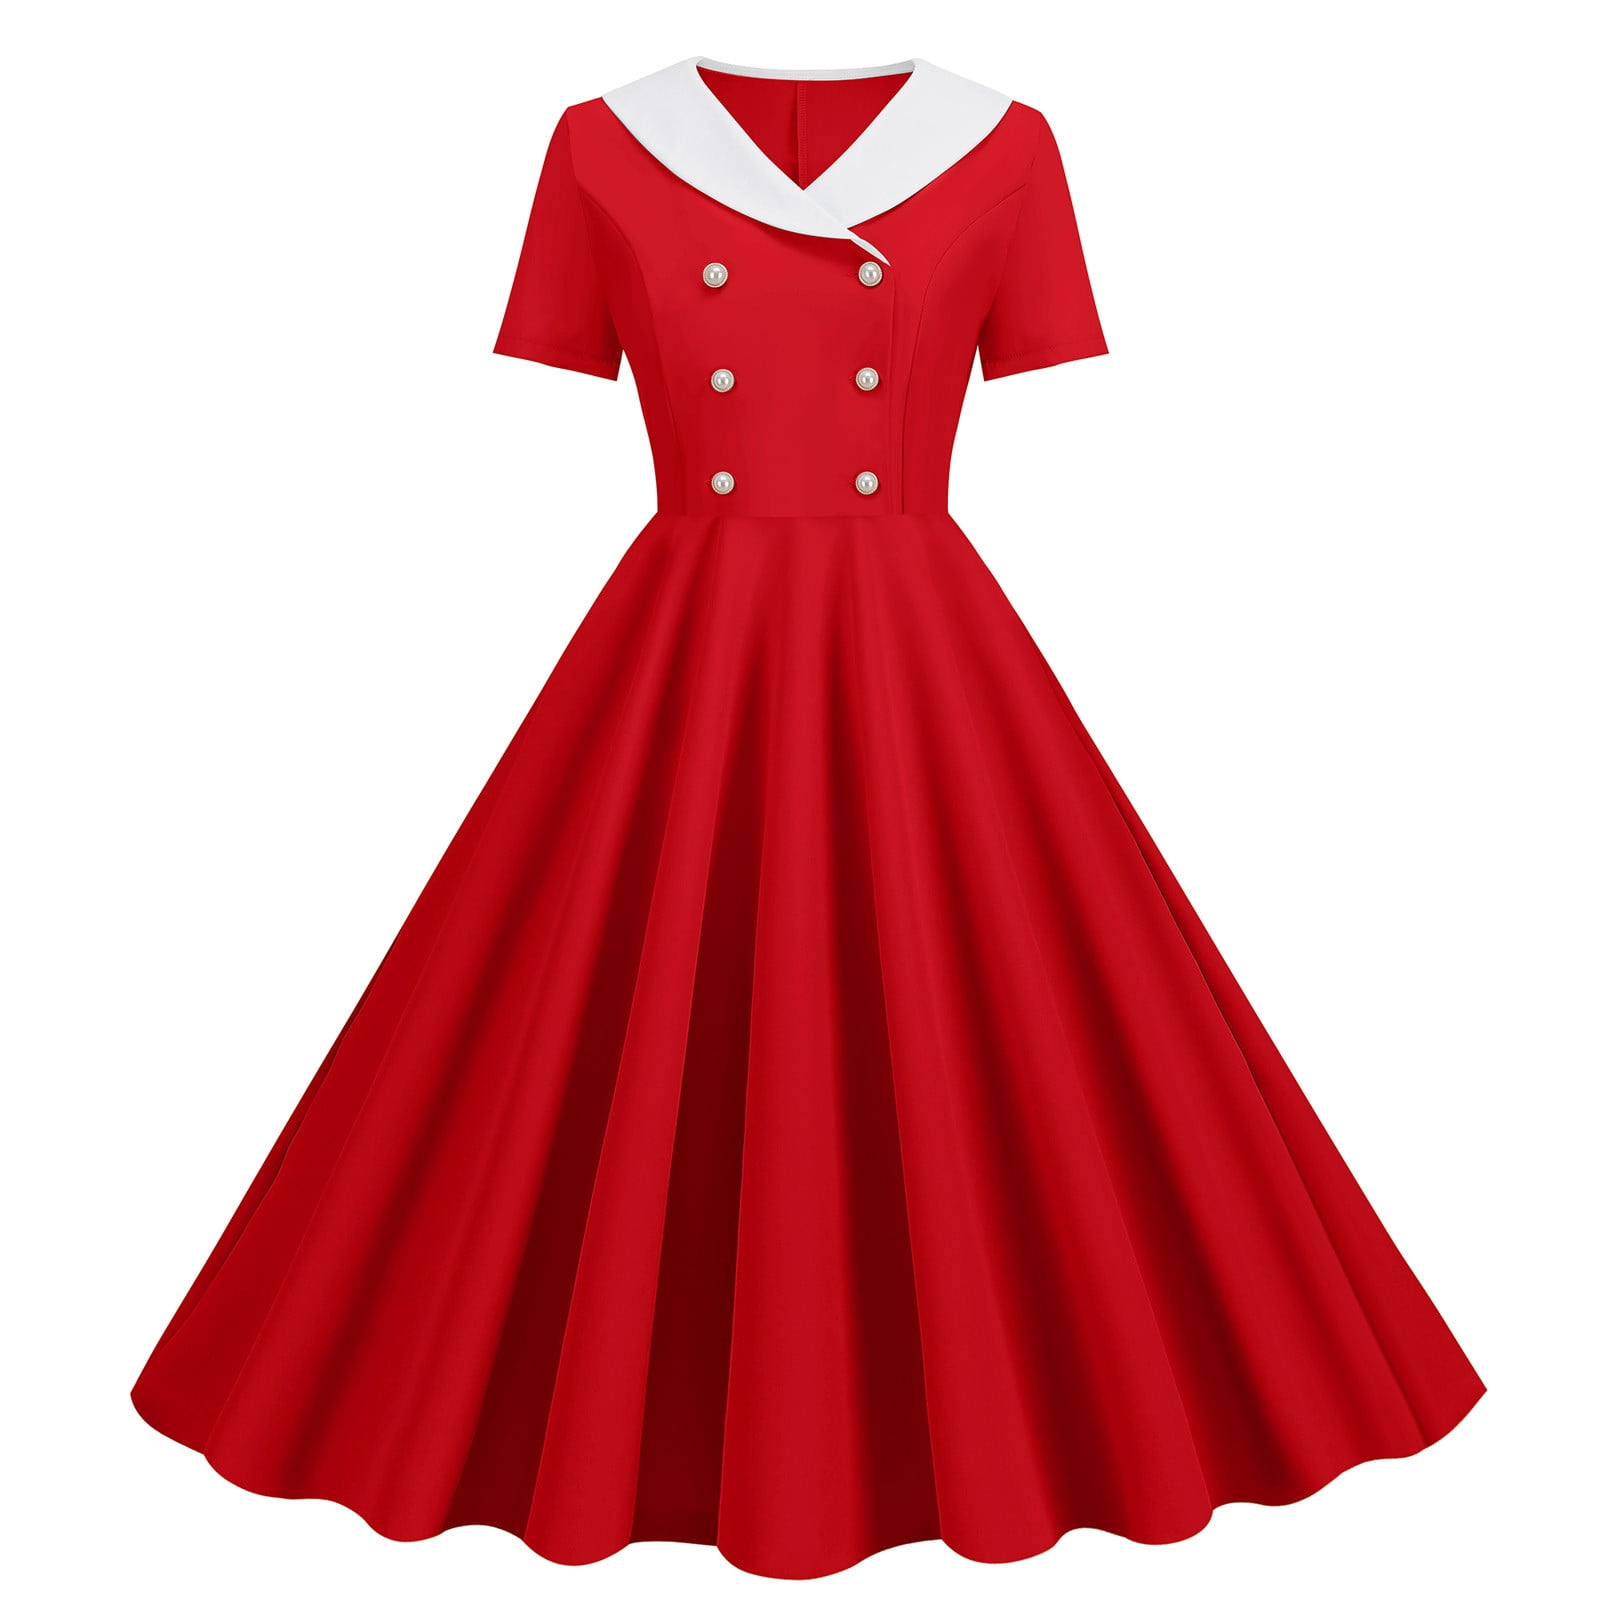 1950s Dresses For Women Vintage Polka Dot Print, Retro Style, Plus Size,  Perfect For Summer Parties And Rockabilly Themes. From Sacallion, $10.17 |  DHgate.Com